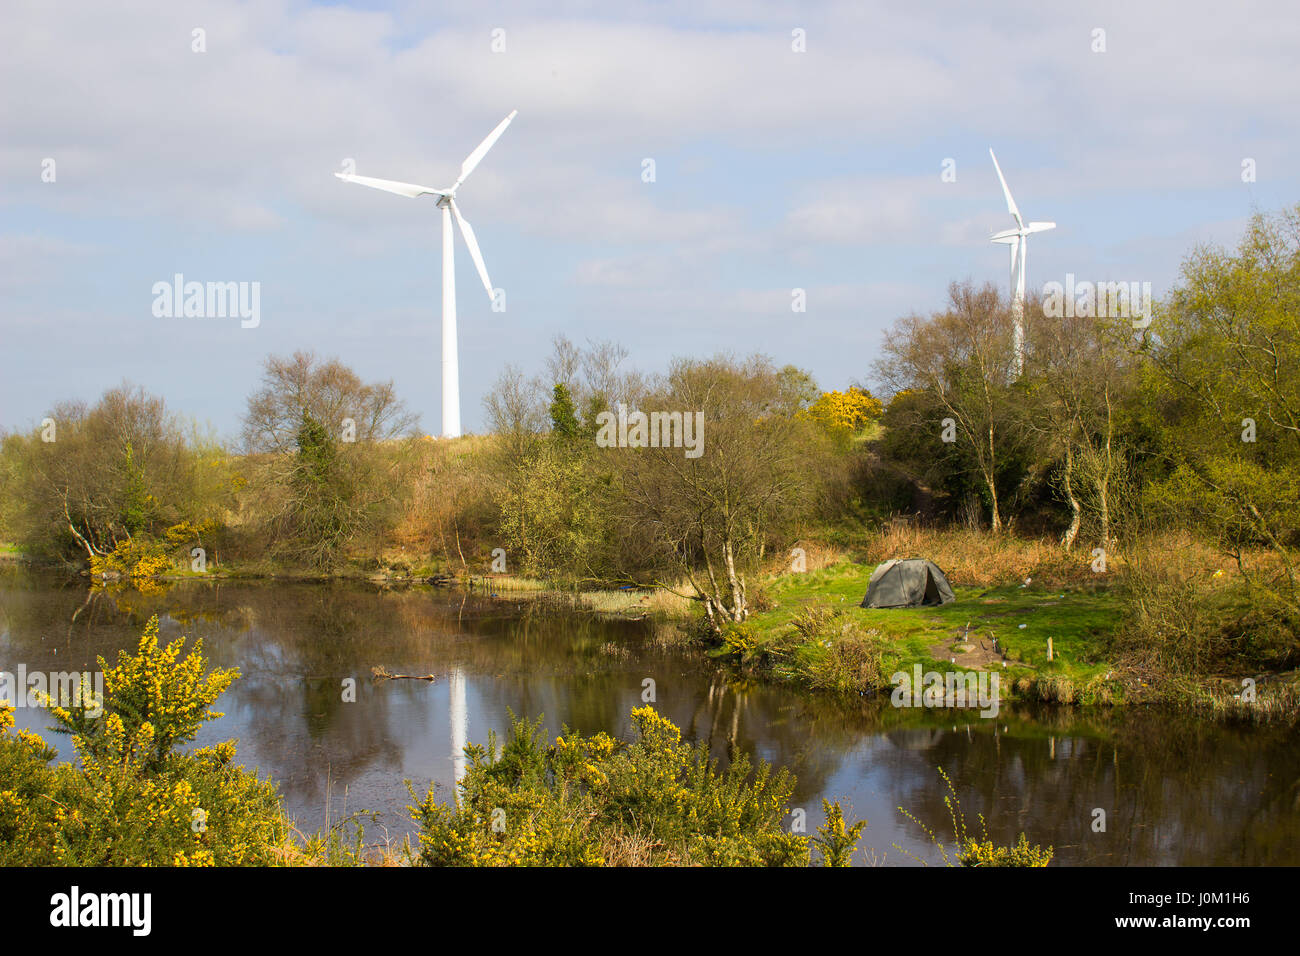 A two man tent pitched on a piece of ground beside the lake at the old lead mines workings in Conlig, County Down with a wind turbine in the backgroud Stock Photo